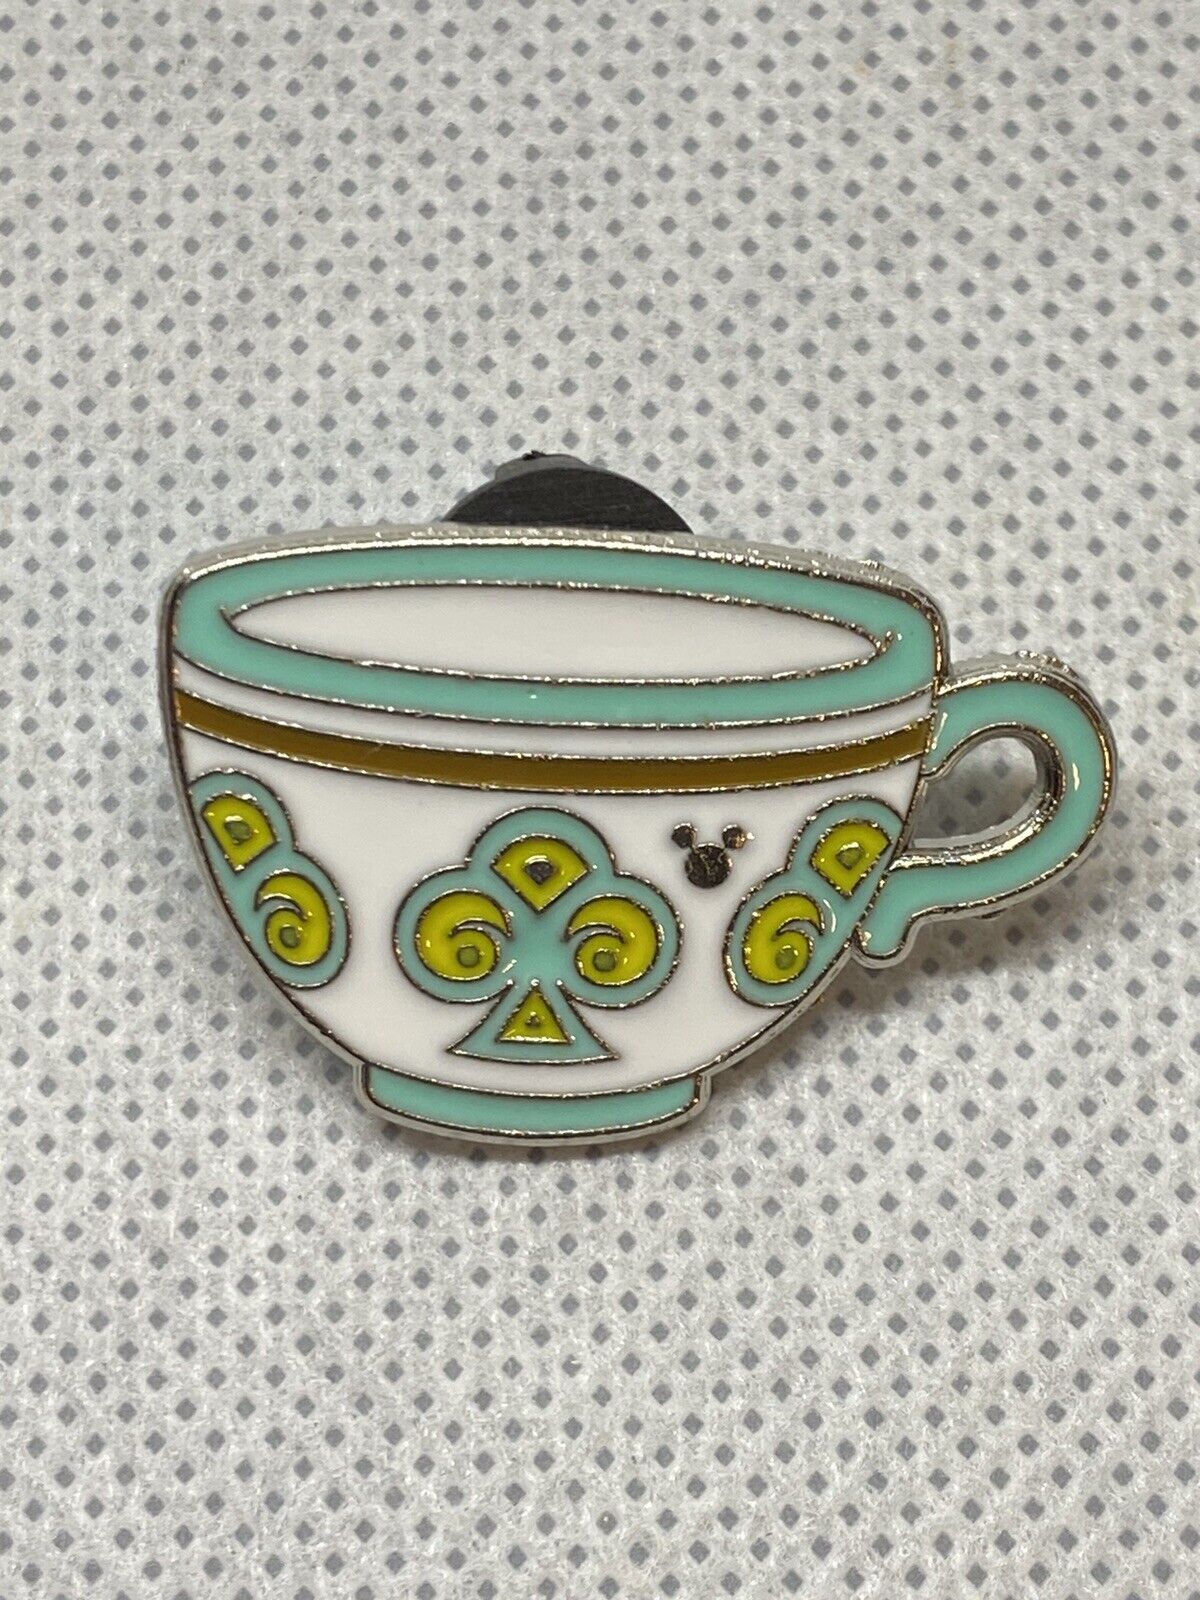 Disney Trading Pin - Mad Hatter's Teacup Turquoise - Alice in Wonderland